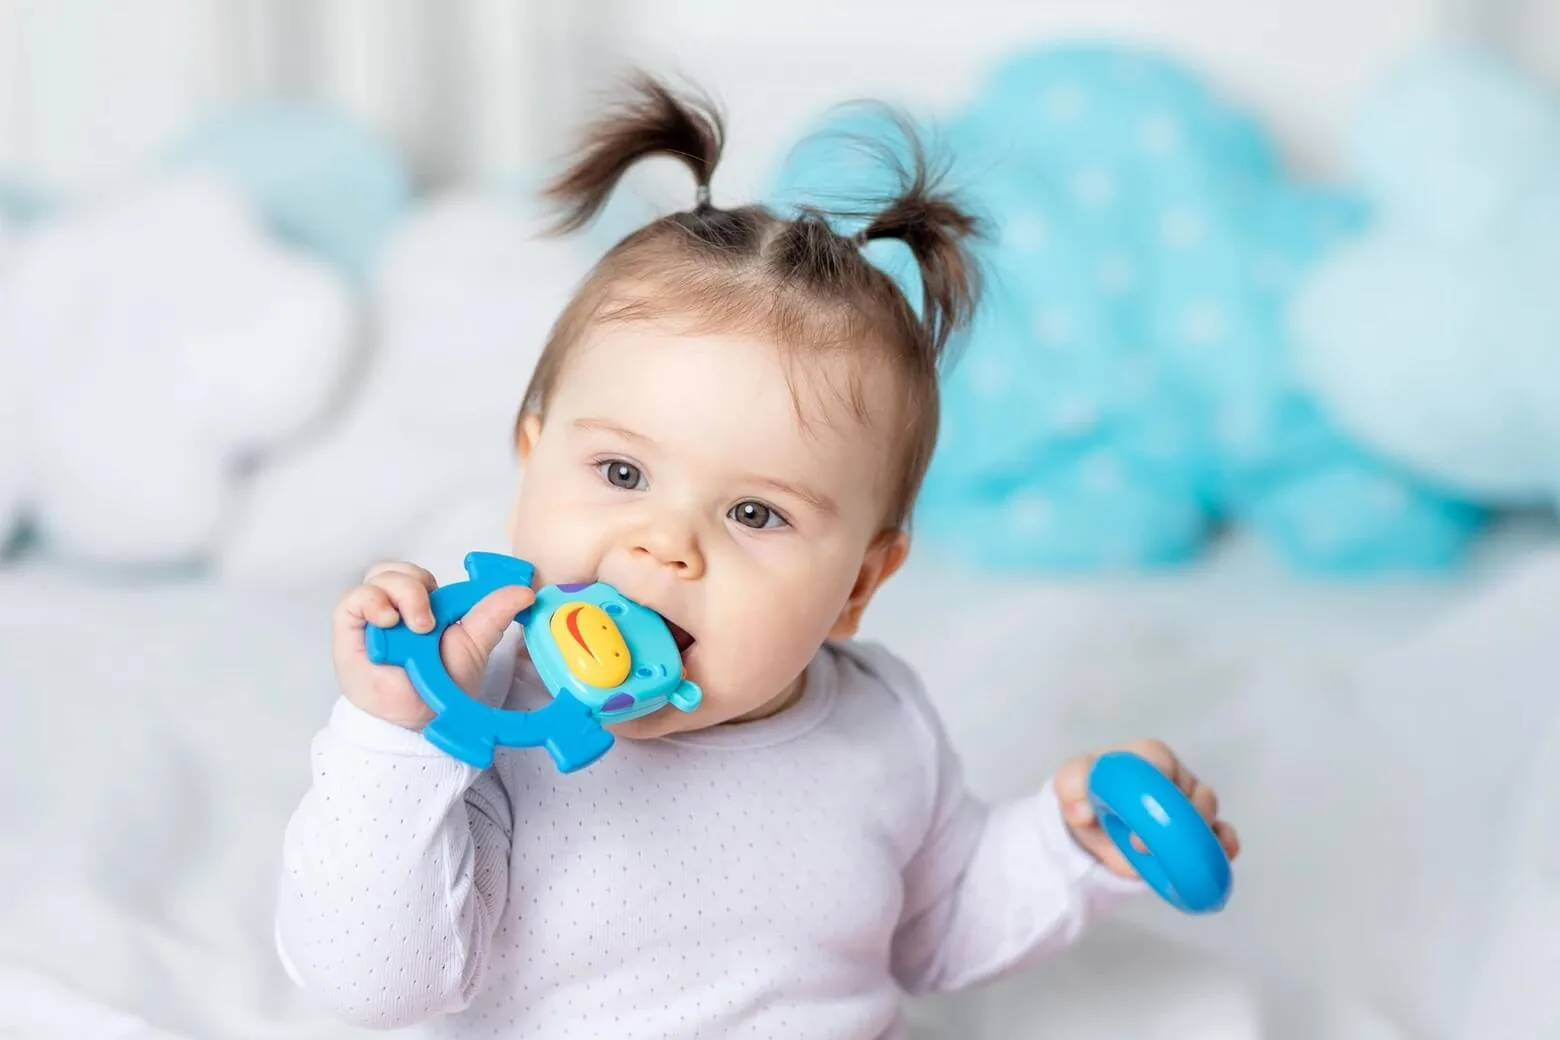 9 Tips from Pediatric Dentistry: Easing Teething Discomfort for Little Ones